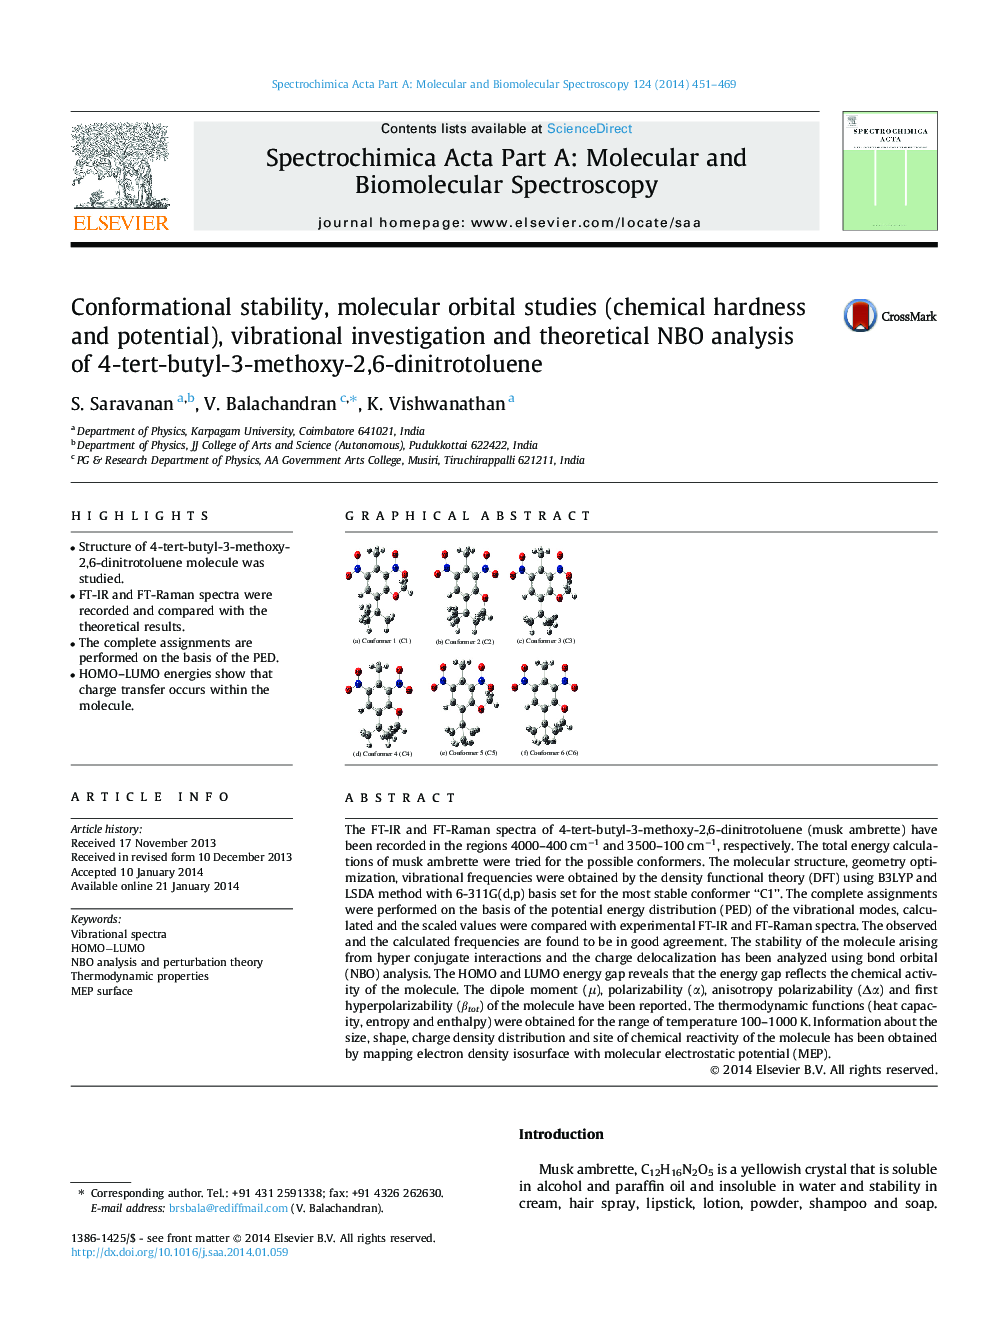 Conformational stability, molecular orbital studies (chemical hardness and potential), vibrational investigation and theoretical NBO analysis of 4-tert-butyl-3-methoxy-2,6-dinitrotoluene